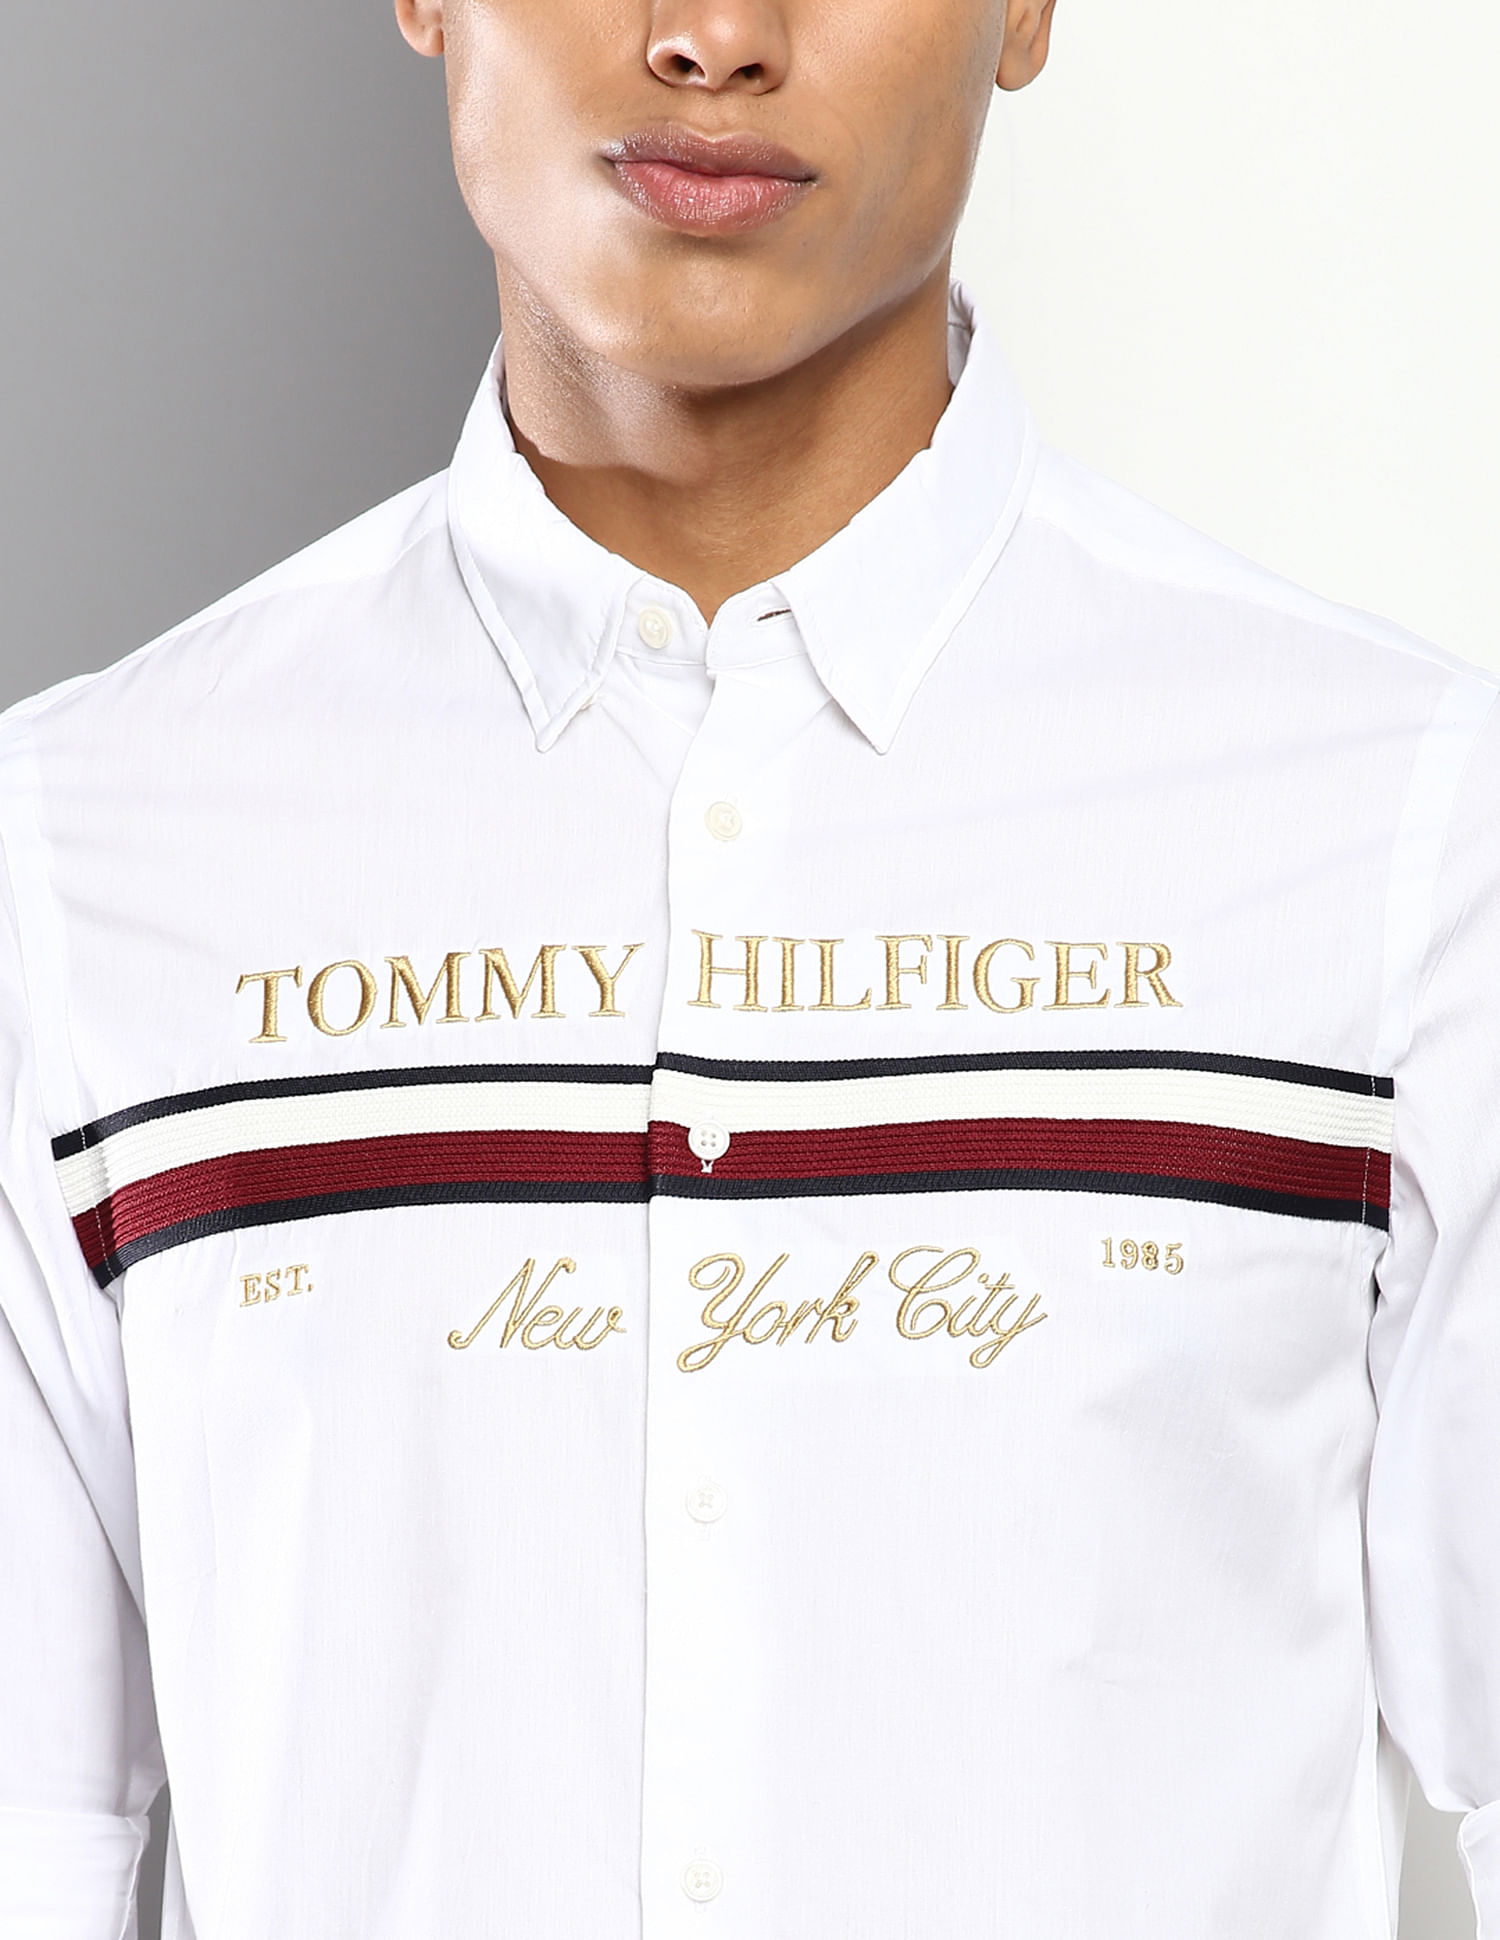 Buy Tommy Hilfiger Men White Embroidered Logo Casual Shirt NNNOW.com